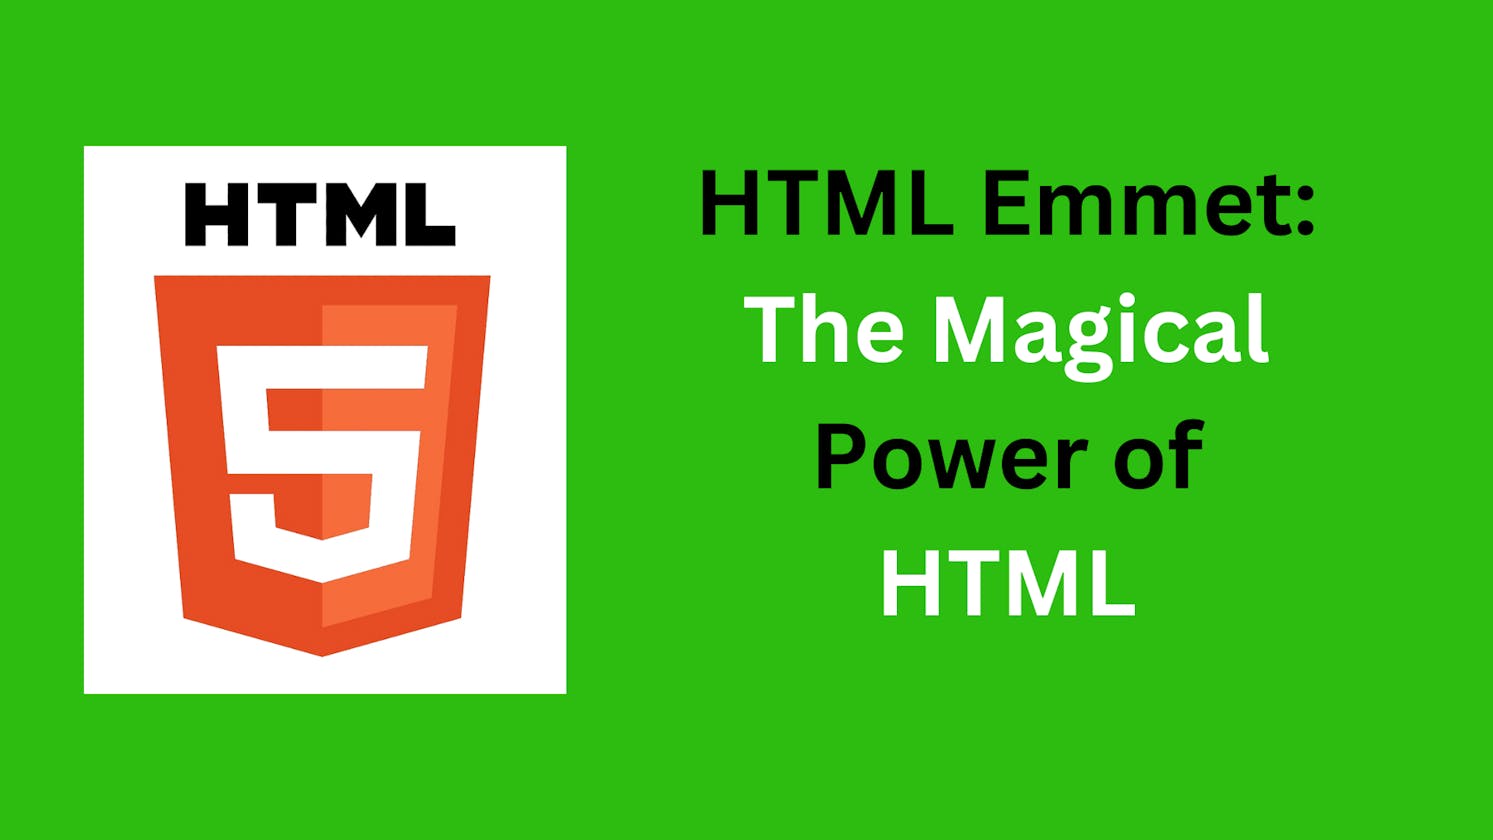 HTML Emmet: The Magical Power of HTML